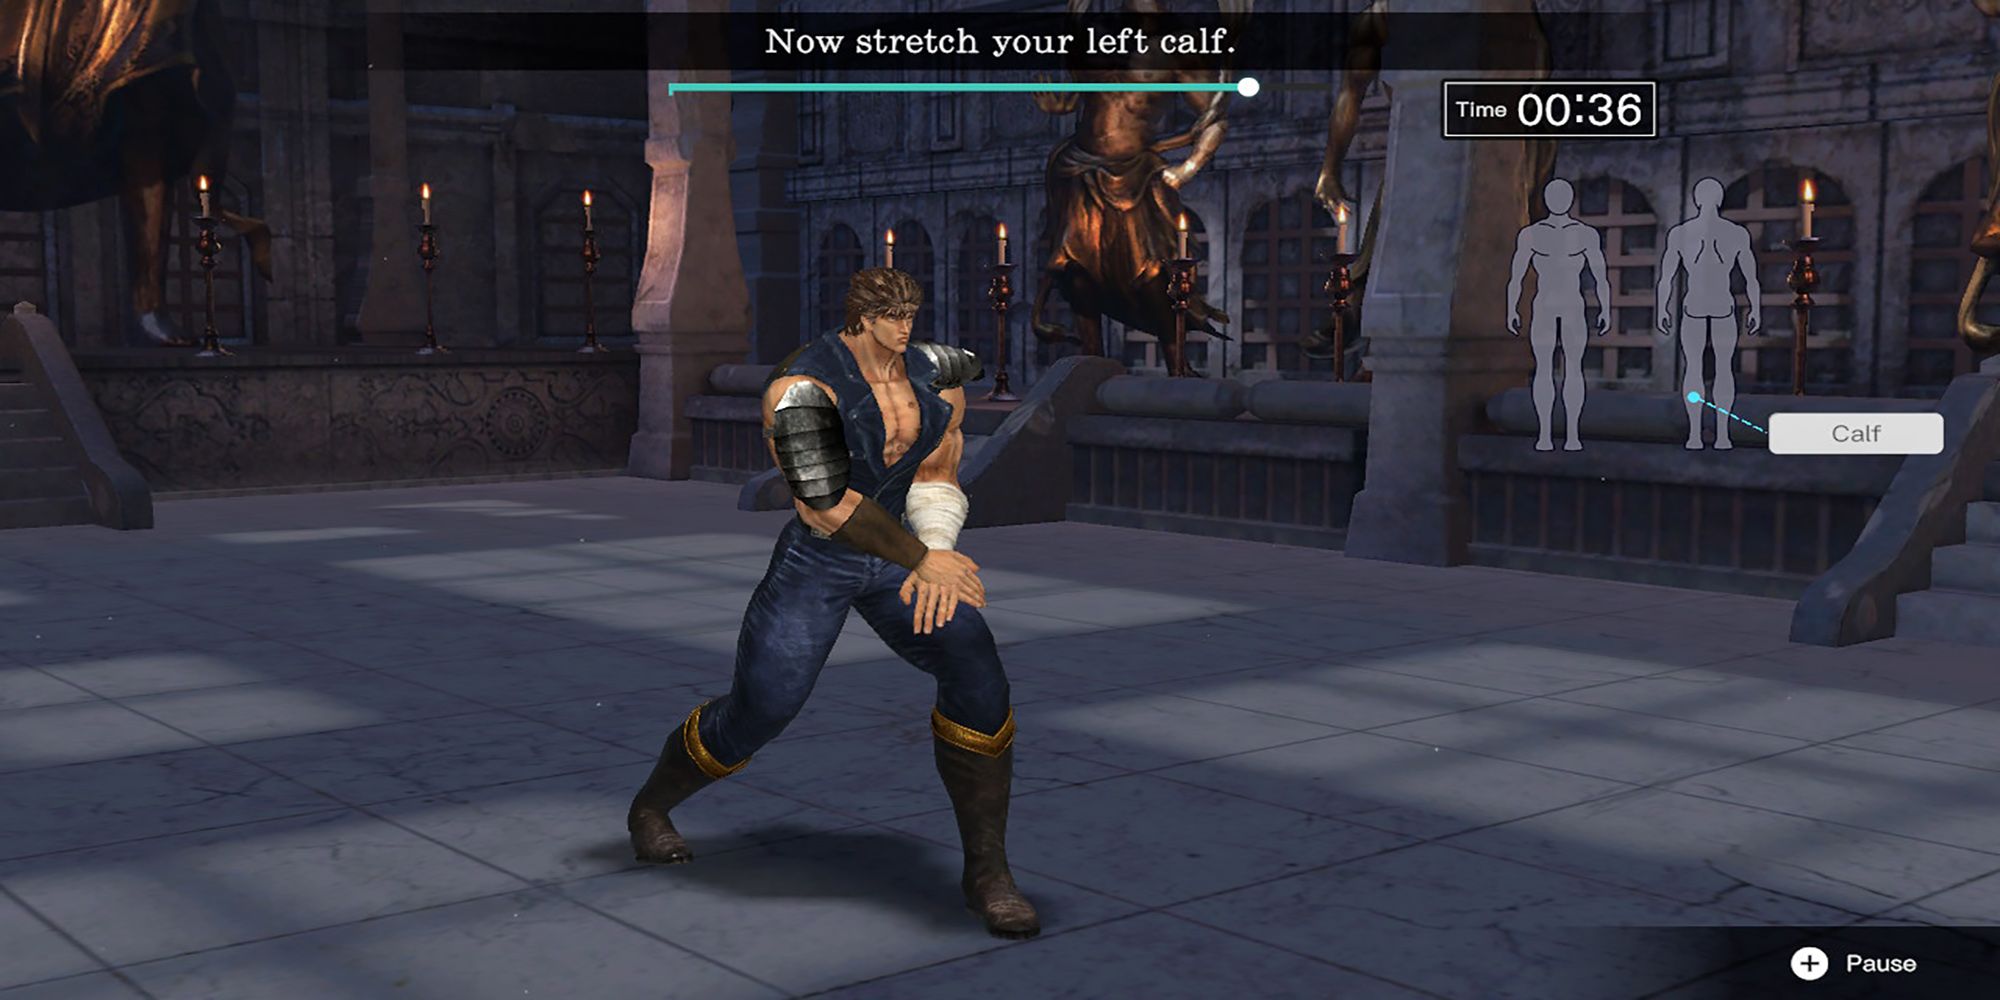 Kenshiro stretches his calf muscle inside a shrine in Fitness Boxing: Fist Of The North Star.